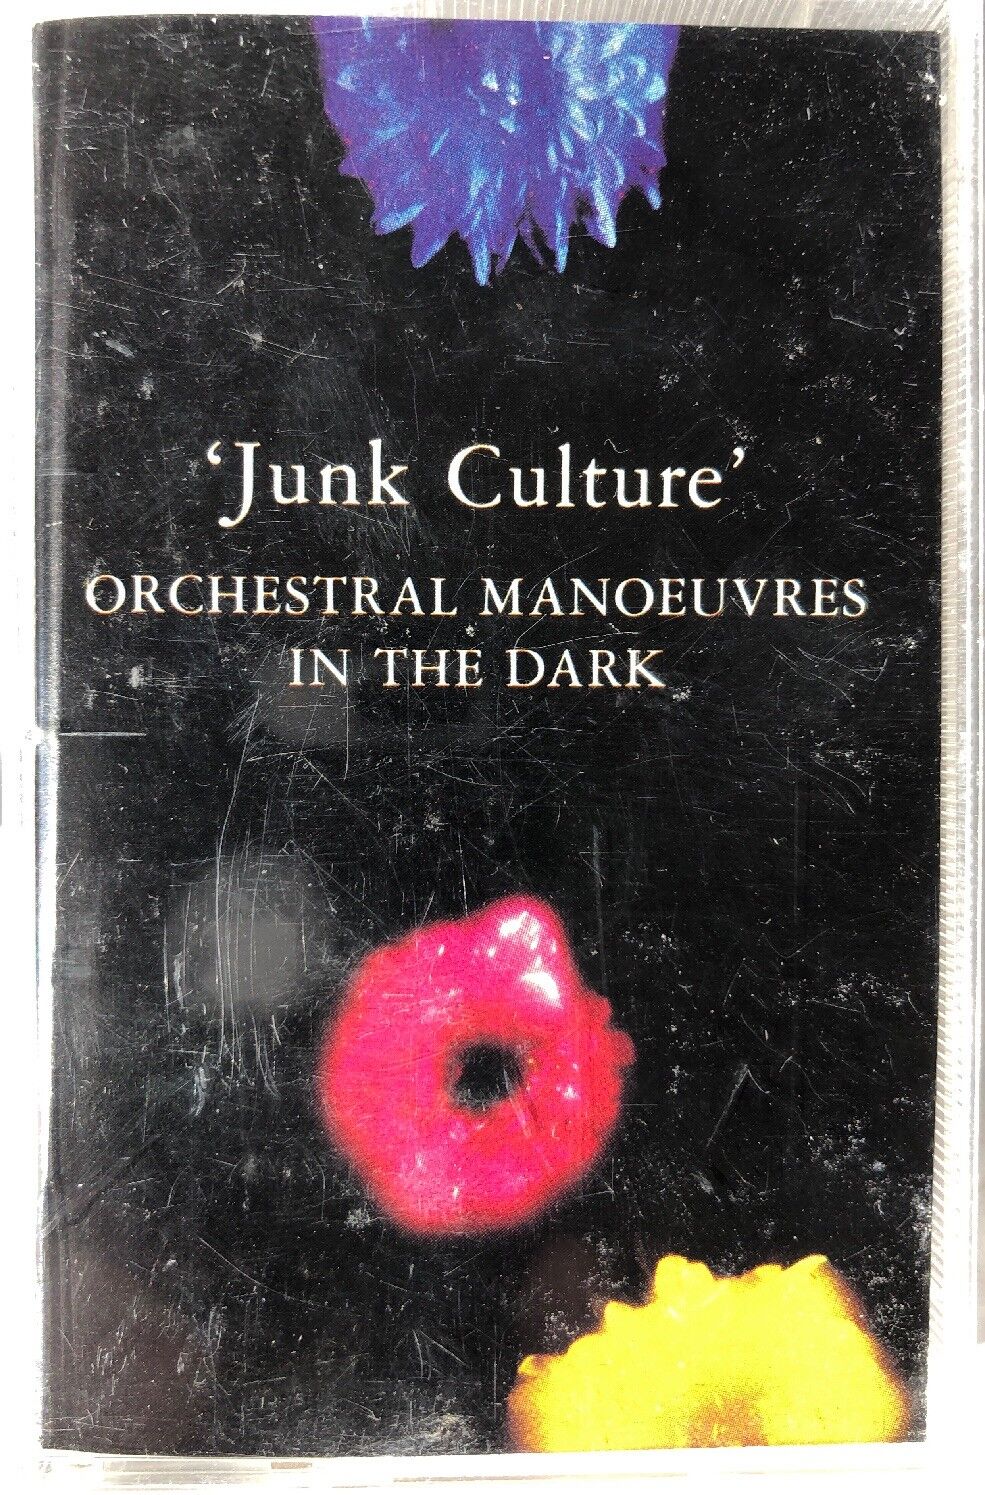 Junk Culture Orchestral Manoeuvres In The Dark Cassette Tape VL4 2290